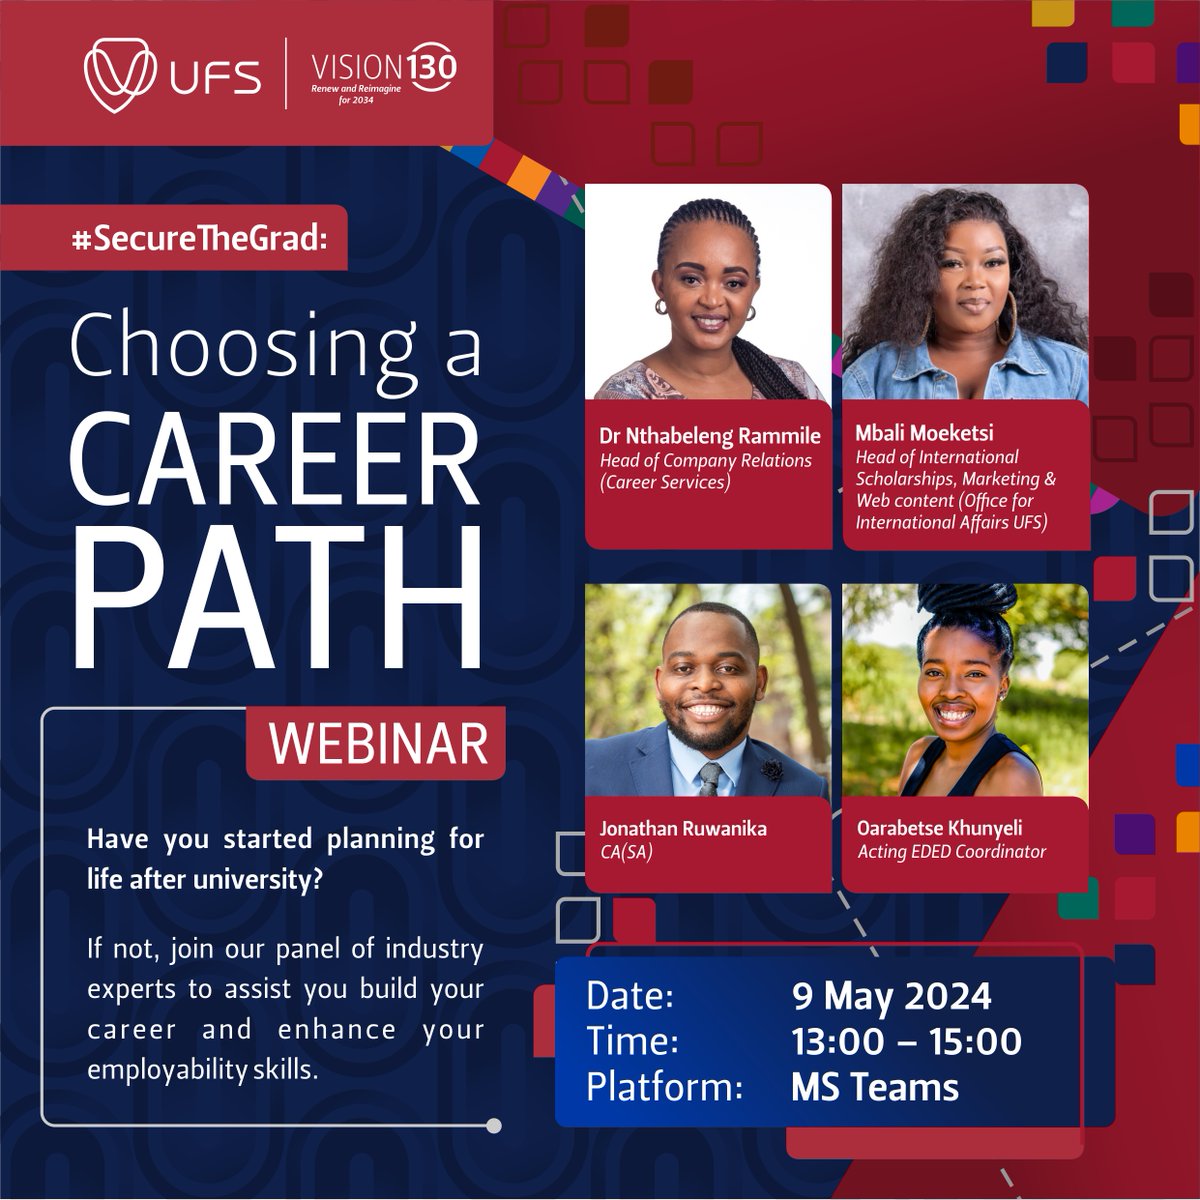 Learn essential strategies for networking, discover industry insights, and unlock the secrets to career preparation. Don't miss this chance to shape your professional destiny! Sign up for the webinar on bit.ly/3W1Sqsz #CareerGoals #NetworkingTips #FutureLeaders